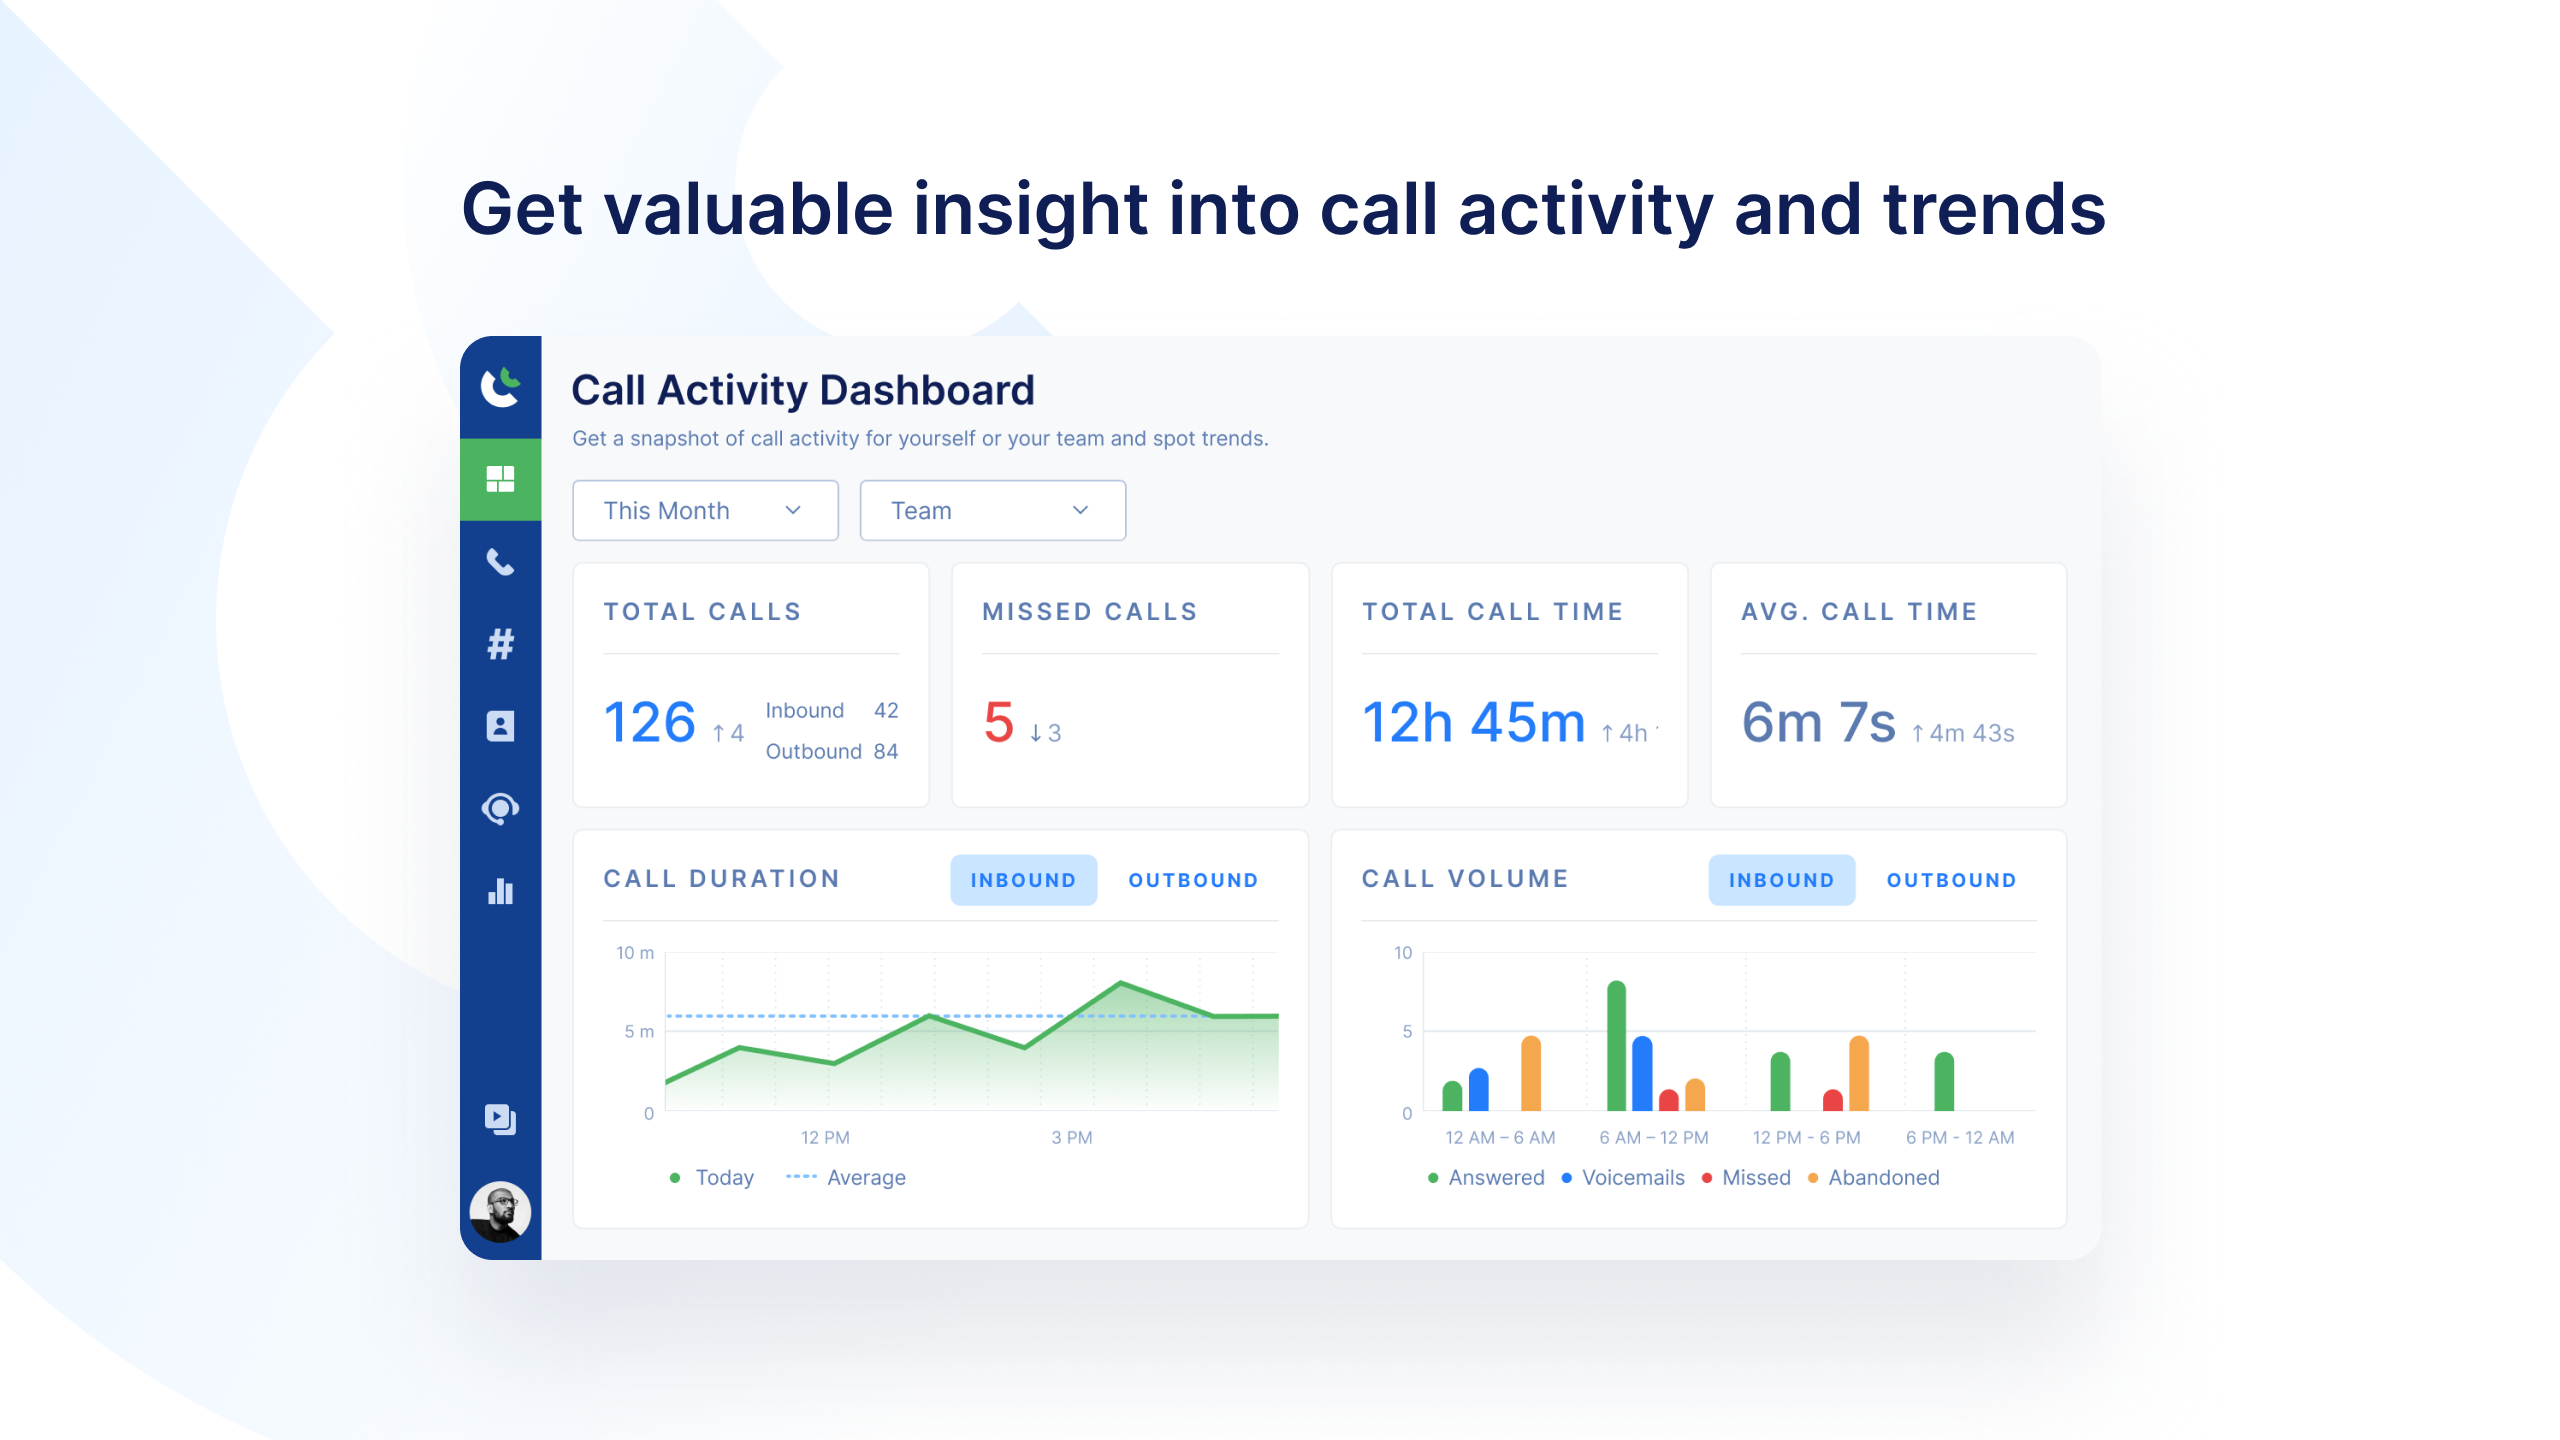 Get valuable insights into call activity and trends